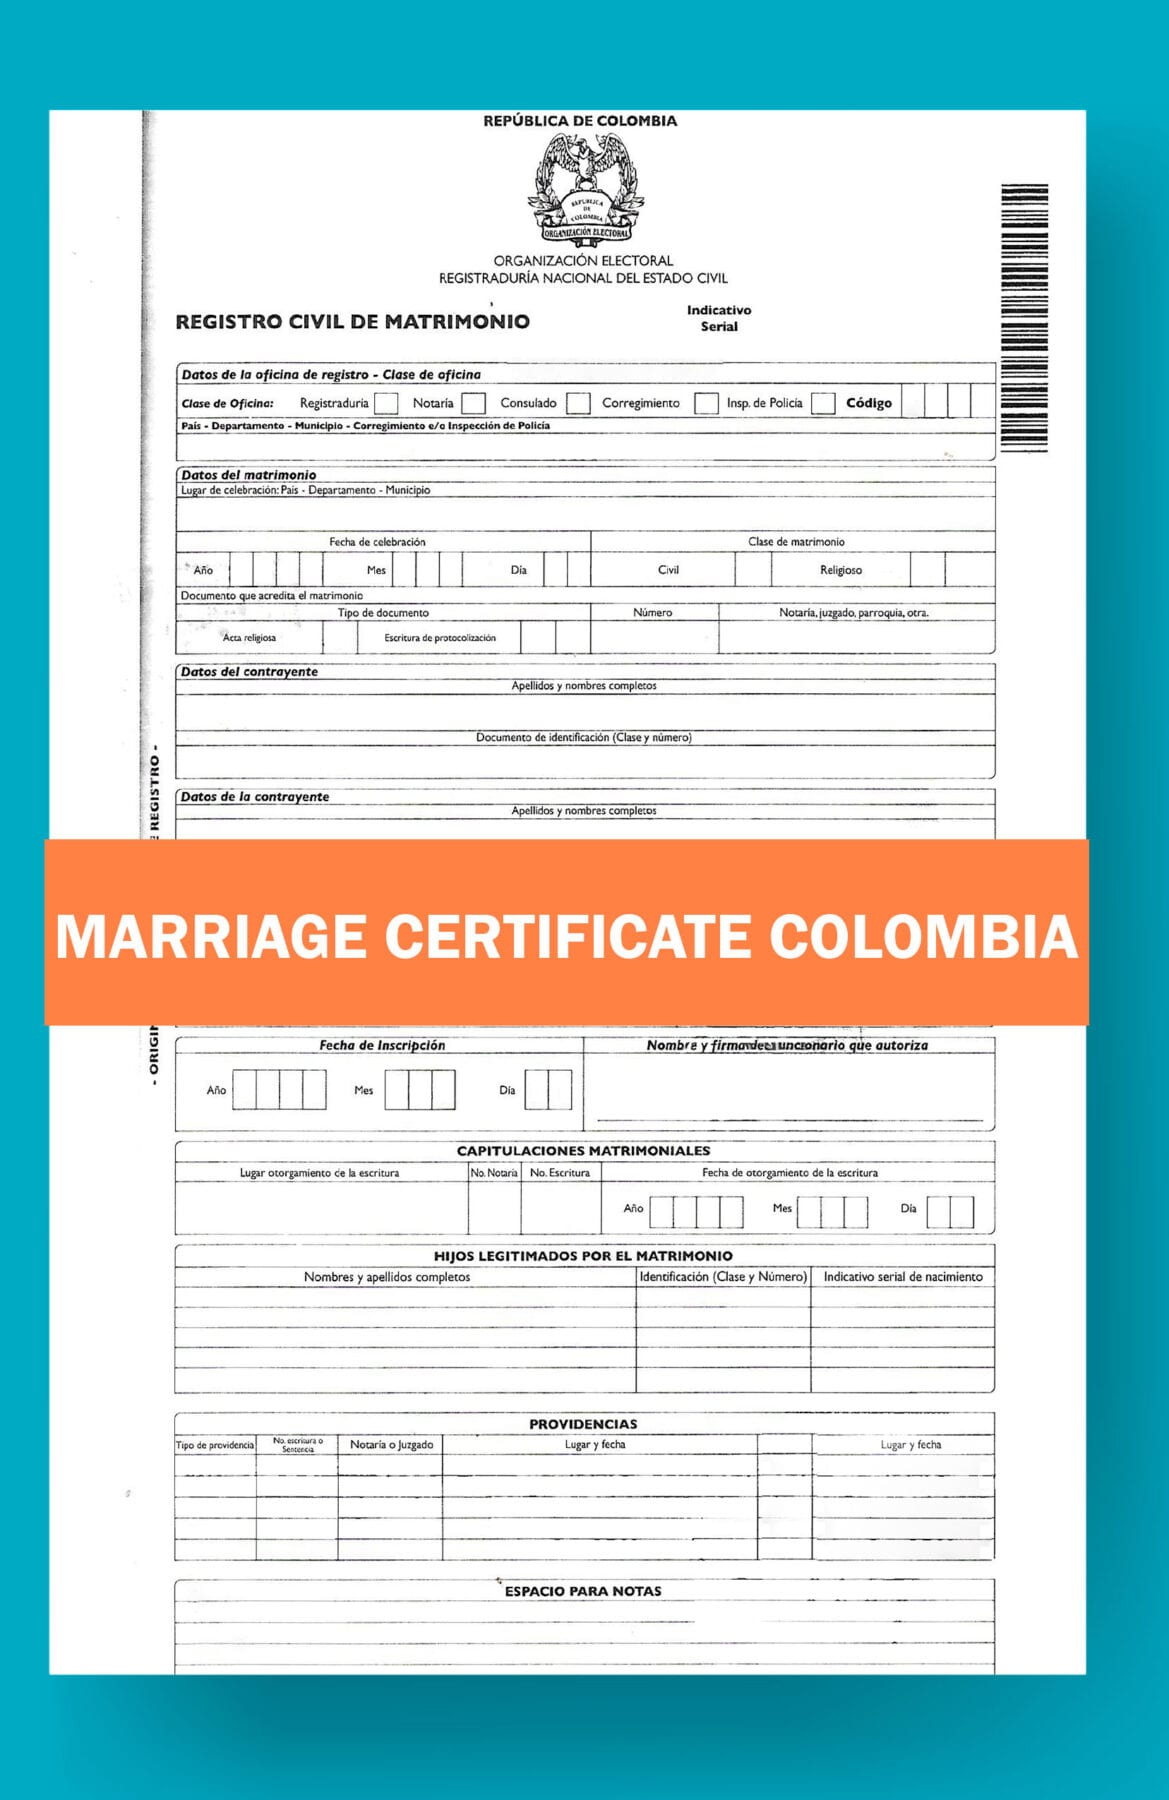 Marriage Certificate Translation $10 pp delivery same day no extra  Intended For Marriage Certificate Translation From Spanish To English Template